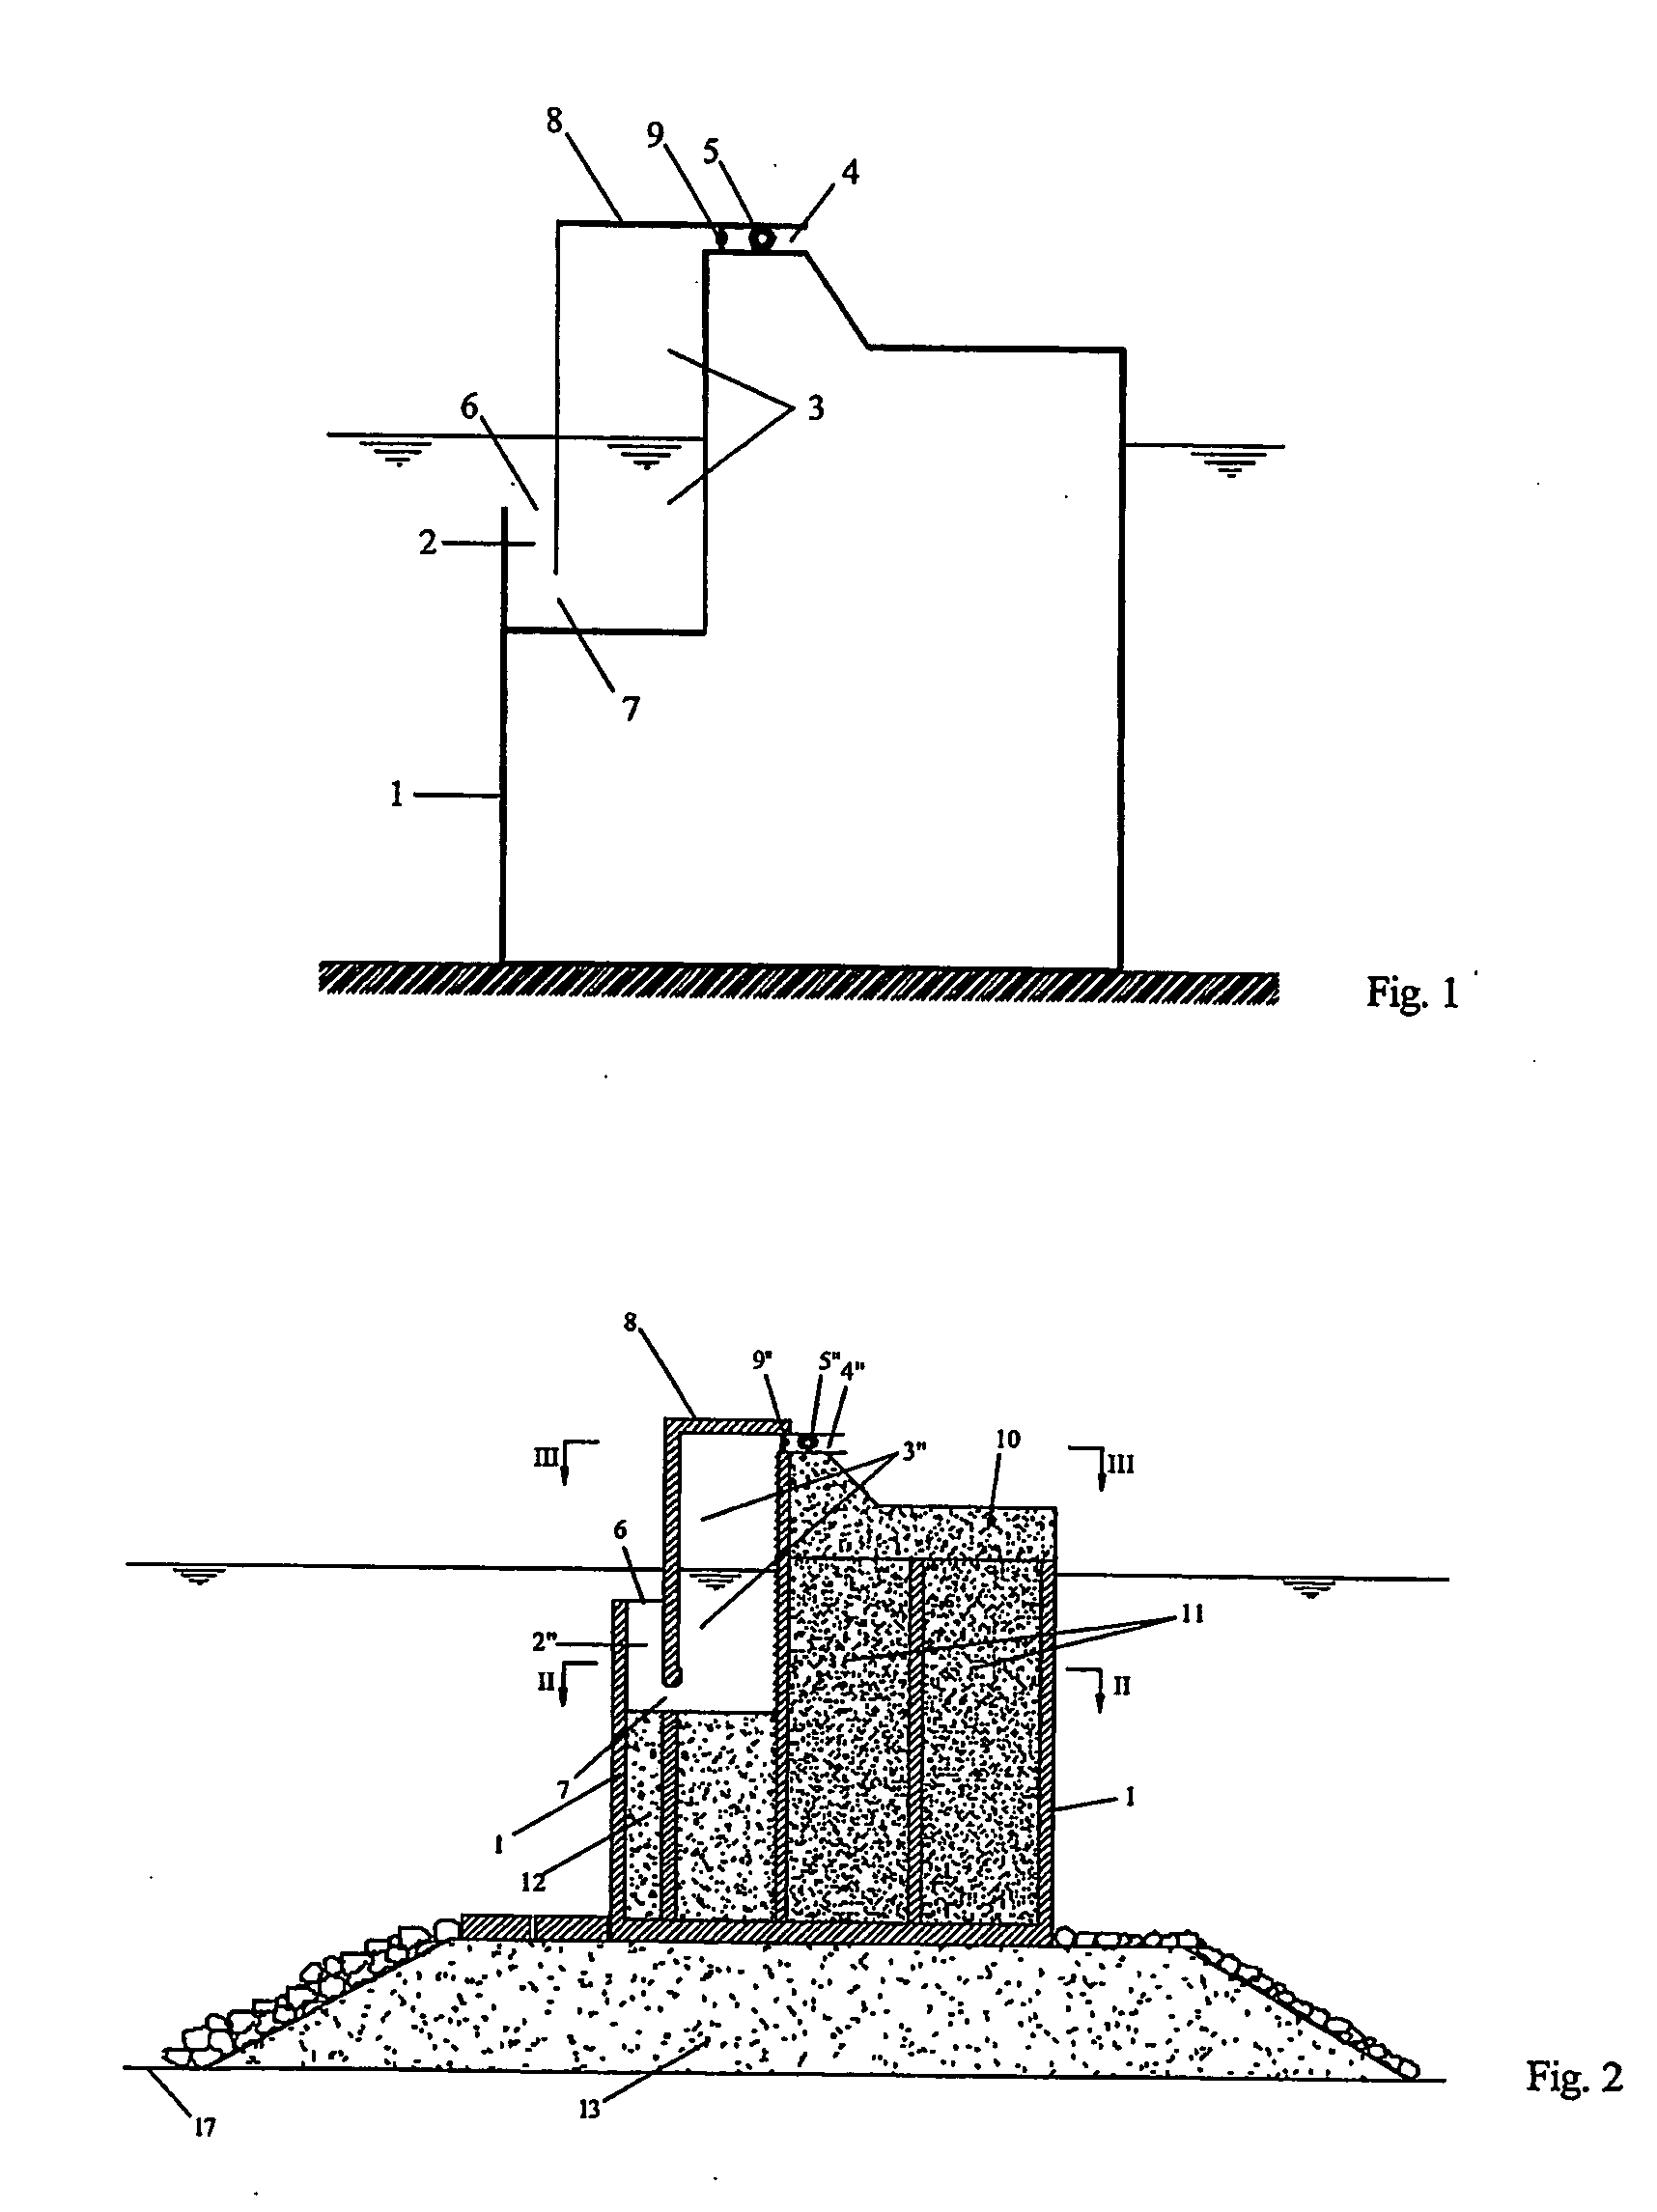 Oscillating water column wave energy converter incorporated into caisson breakwater